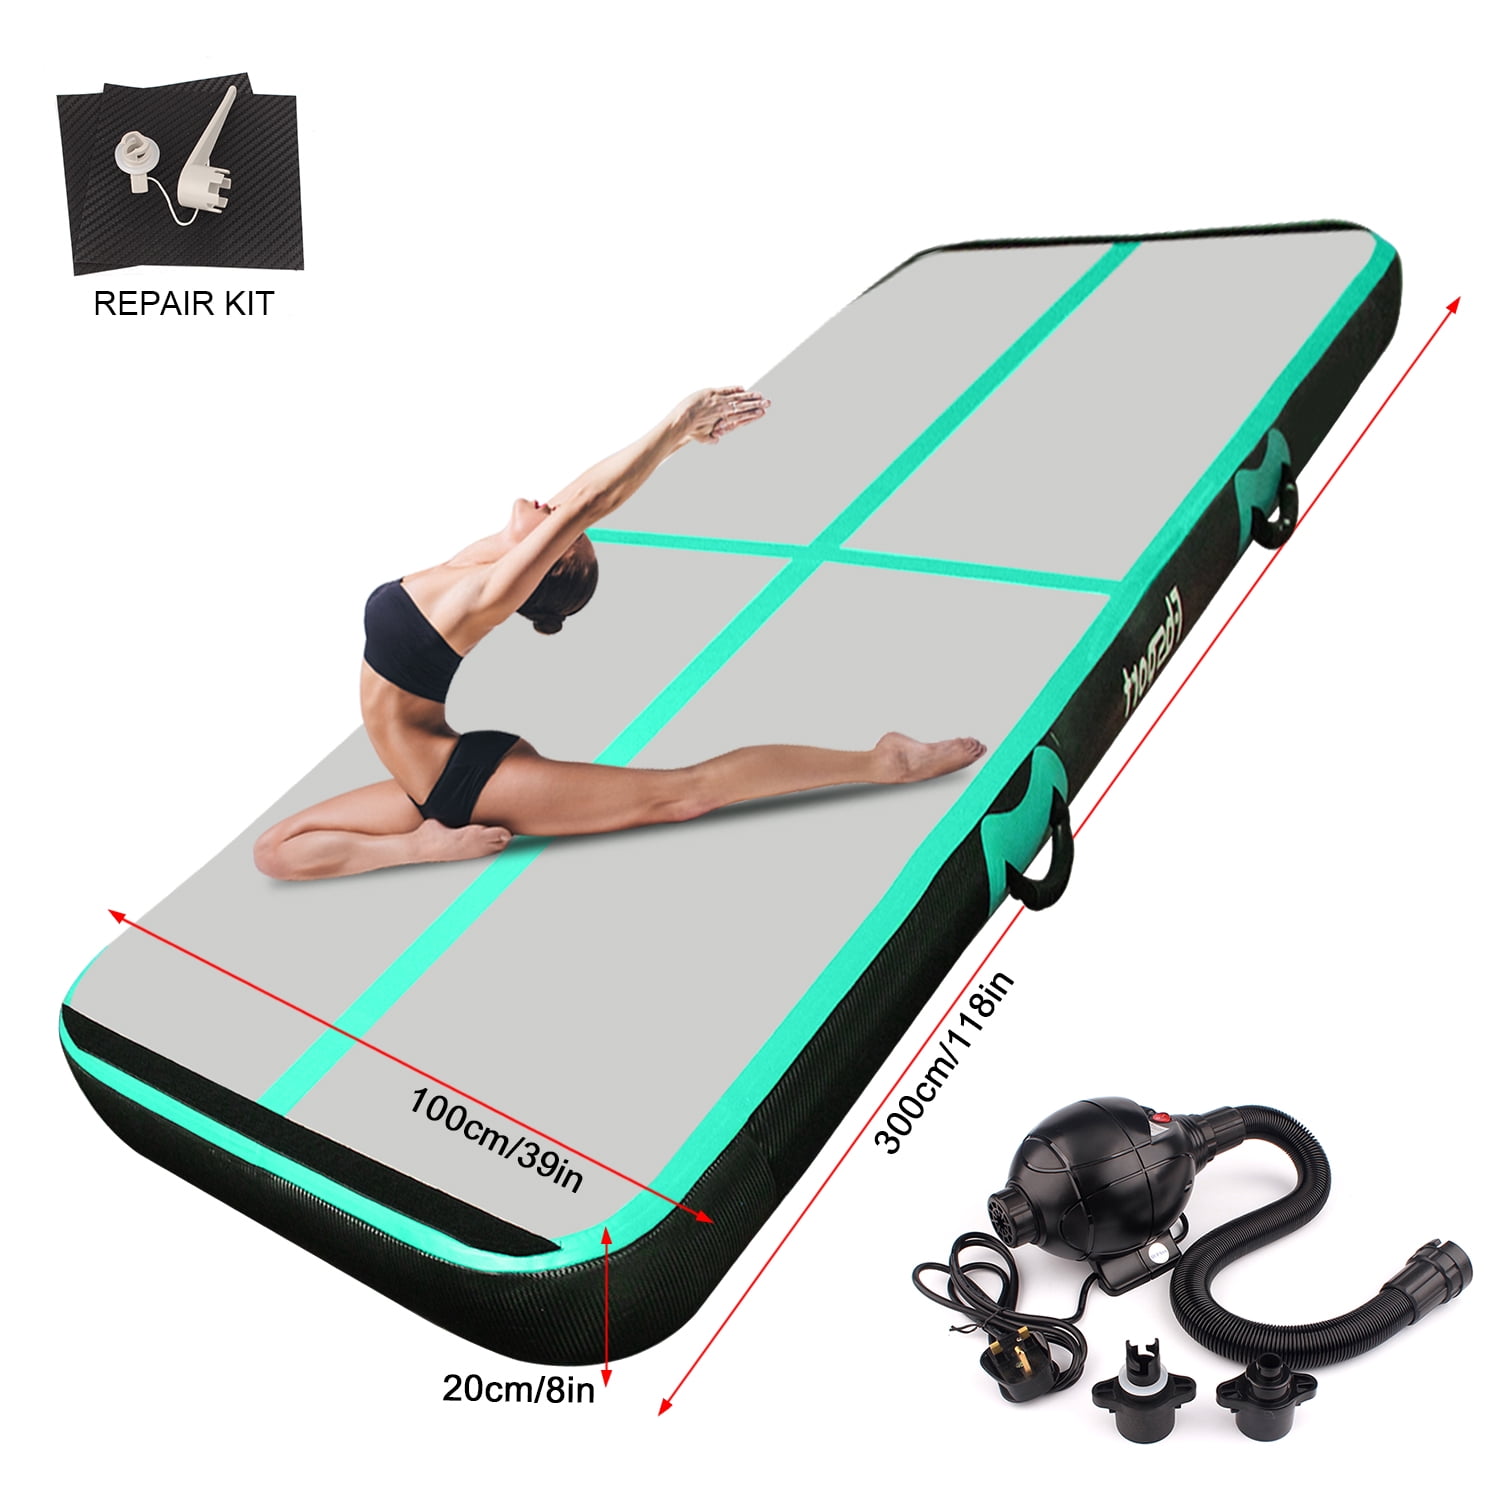 Air Mat Tumble Track Gymnastics Inflatable Tumbling Mat with Electric Air Pump for Home Use/Tumble/Gym/Training/Cheerleading 3.3Ft X 2Ft x 8Inch, BLACK 